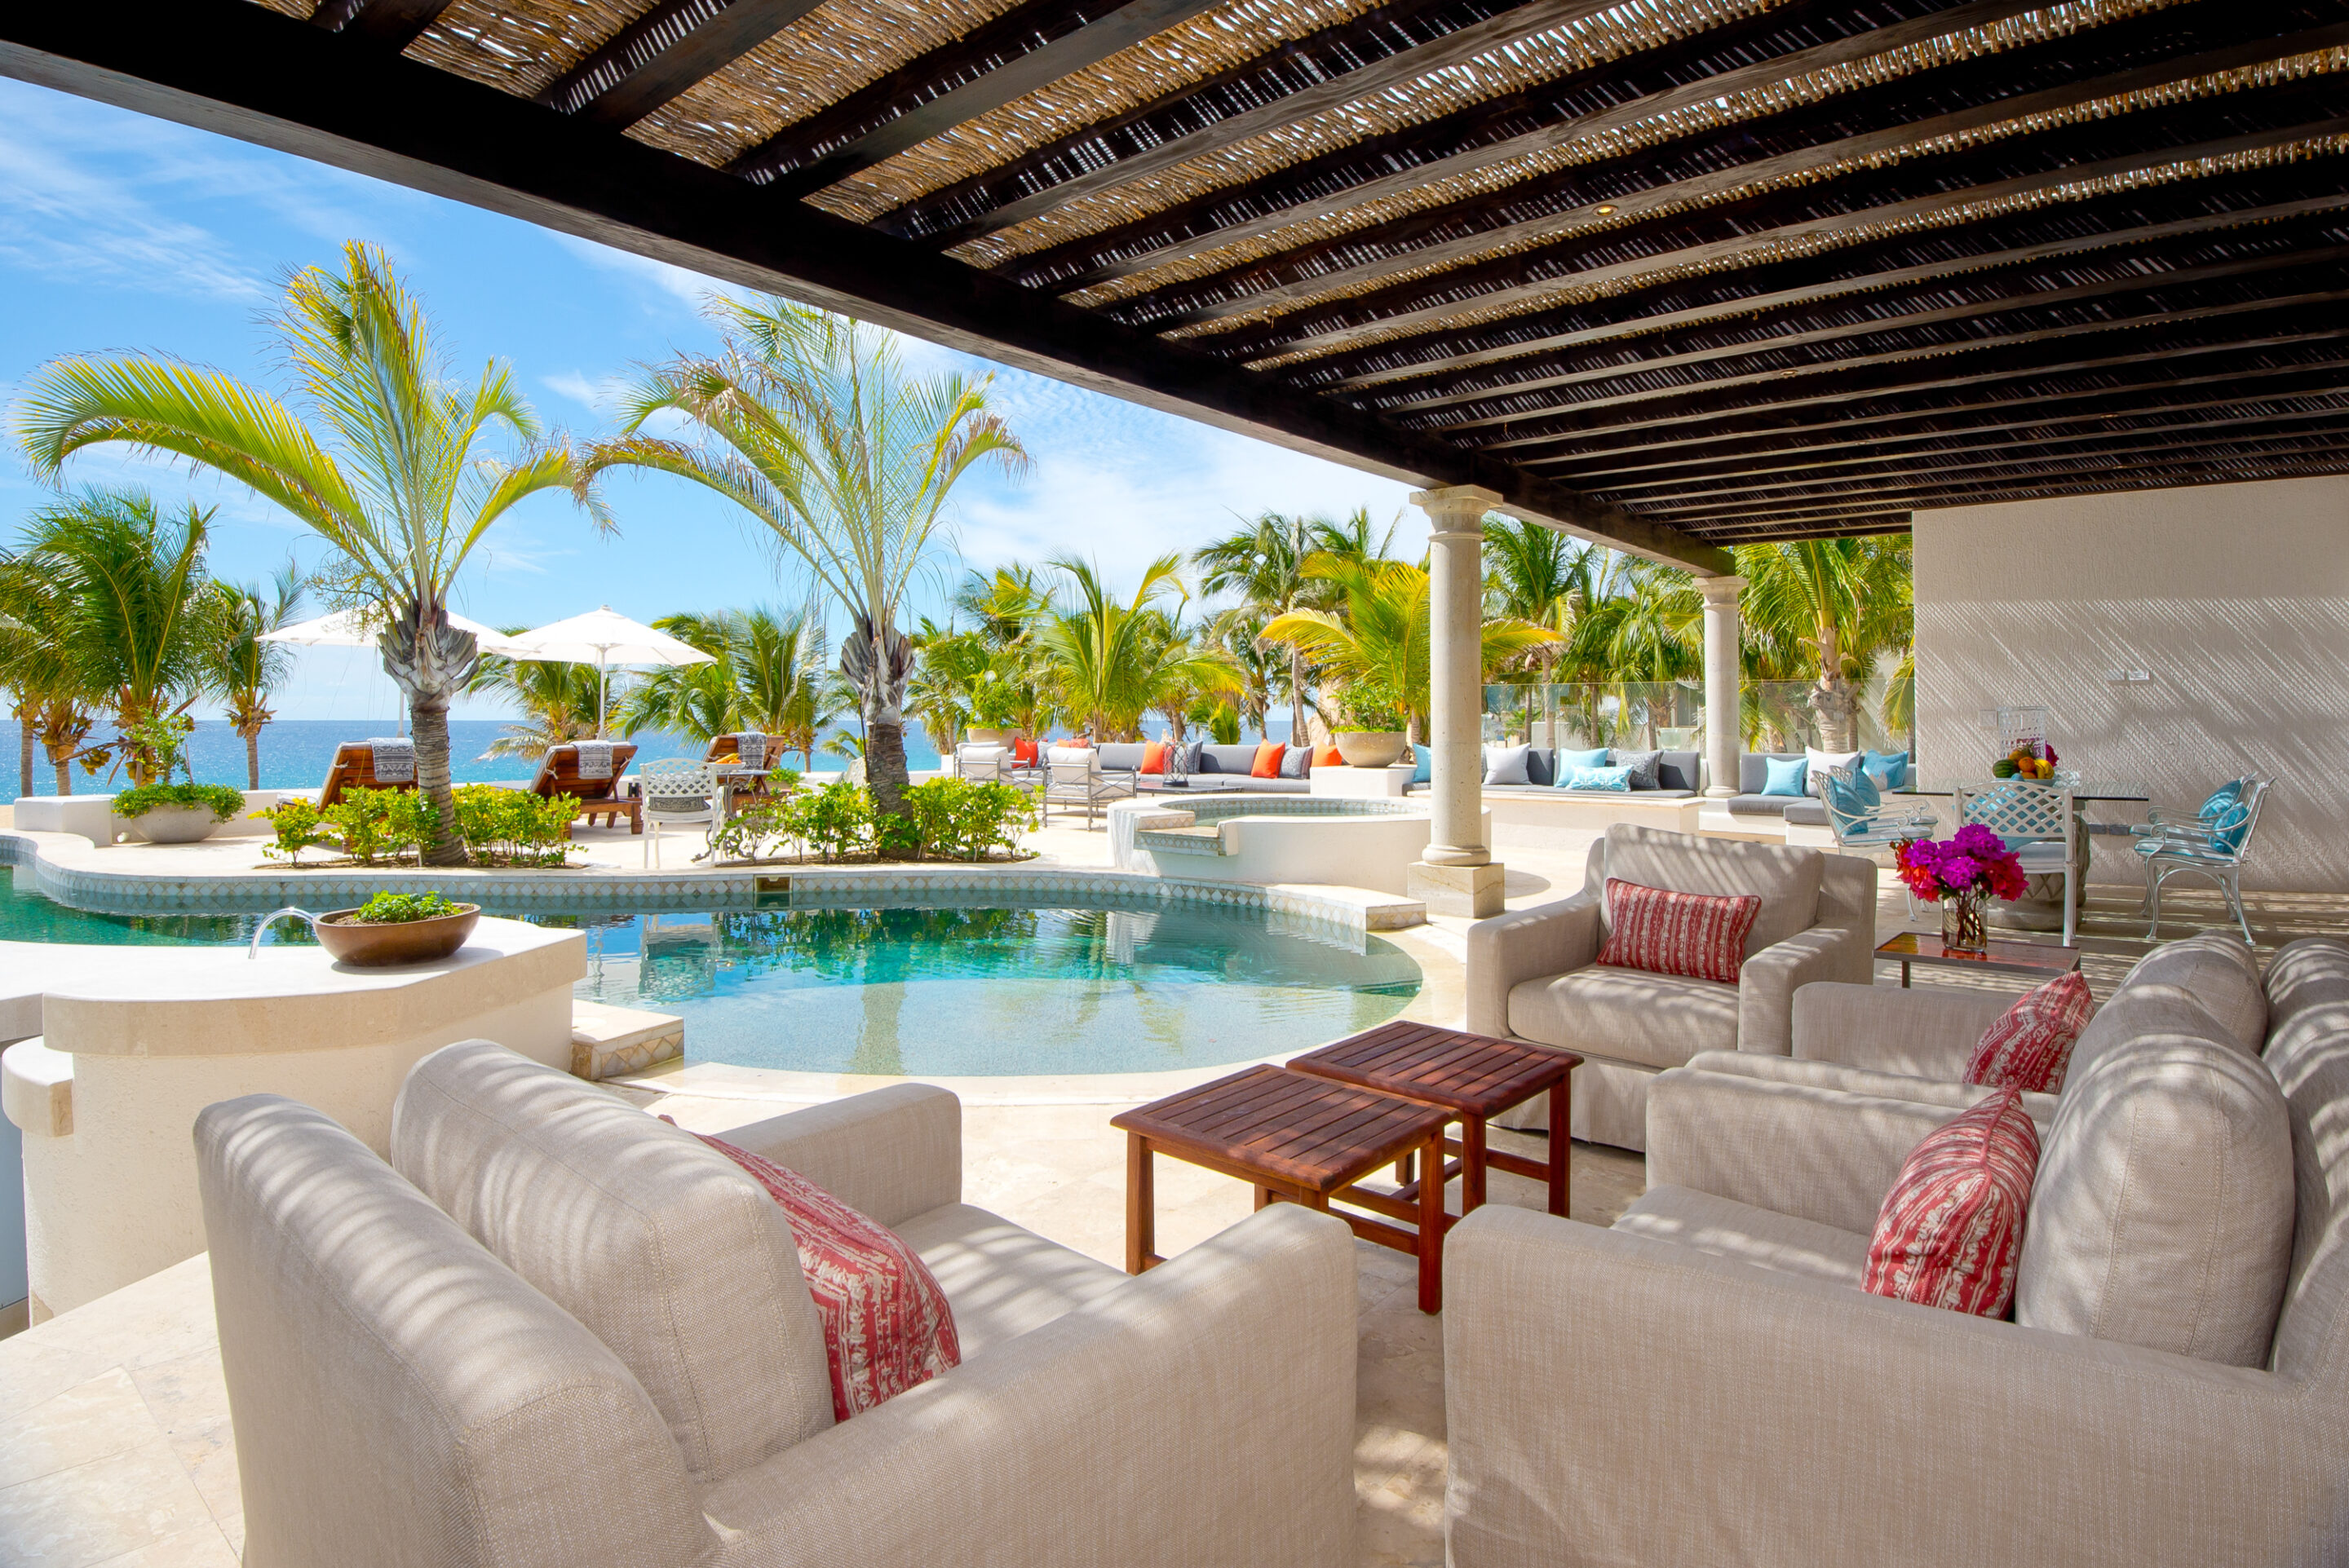 Book Our Stunning Pedregal Vacation Rentals